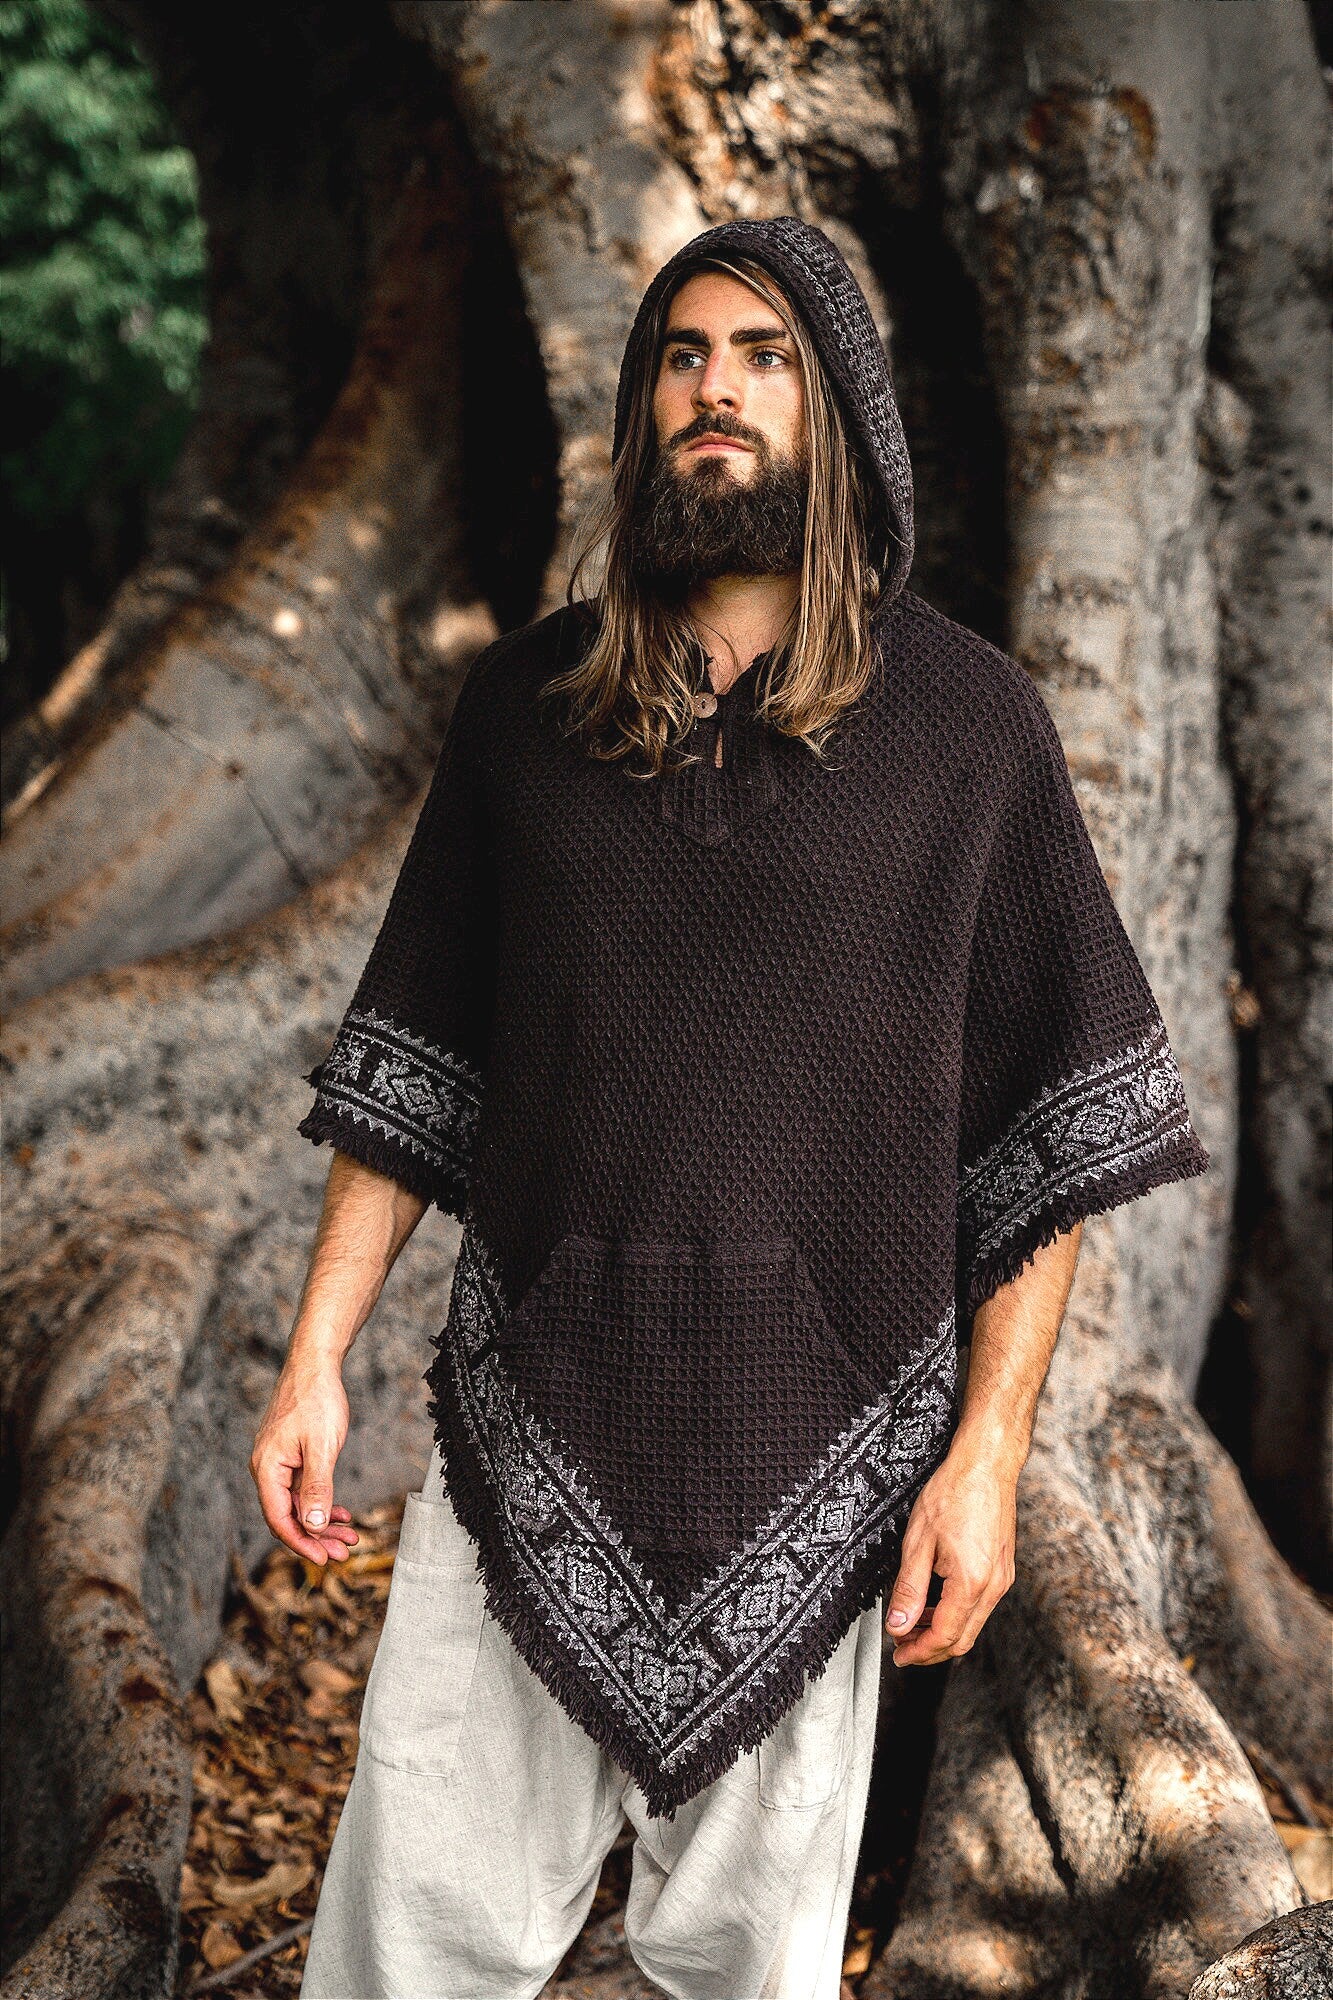 Our VECHO poncho is totally vegan! it is made of natural textured cotton and is decorated with block printed patterns . . .

It has a large hood and a V neck with a wooden button . . . 

Featuring 2 pockets and a large hood . . .